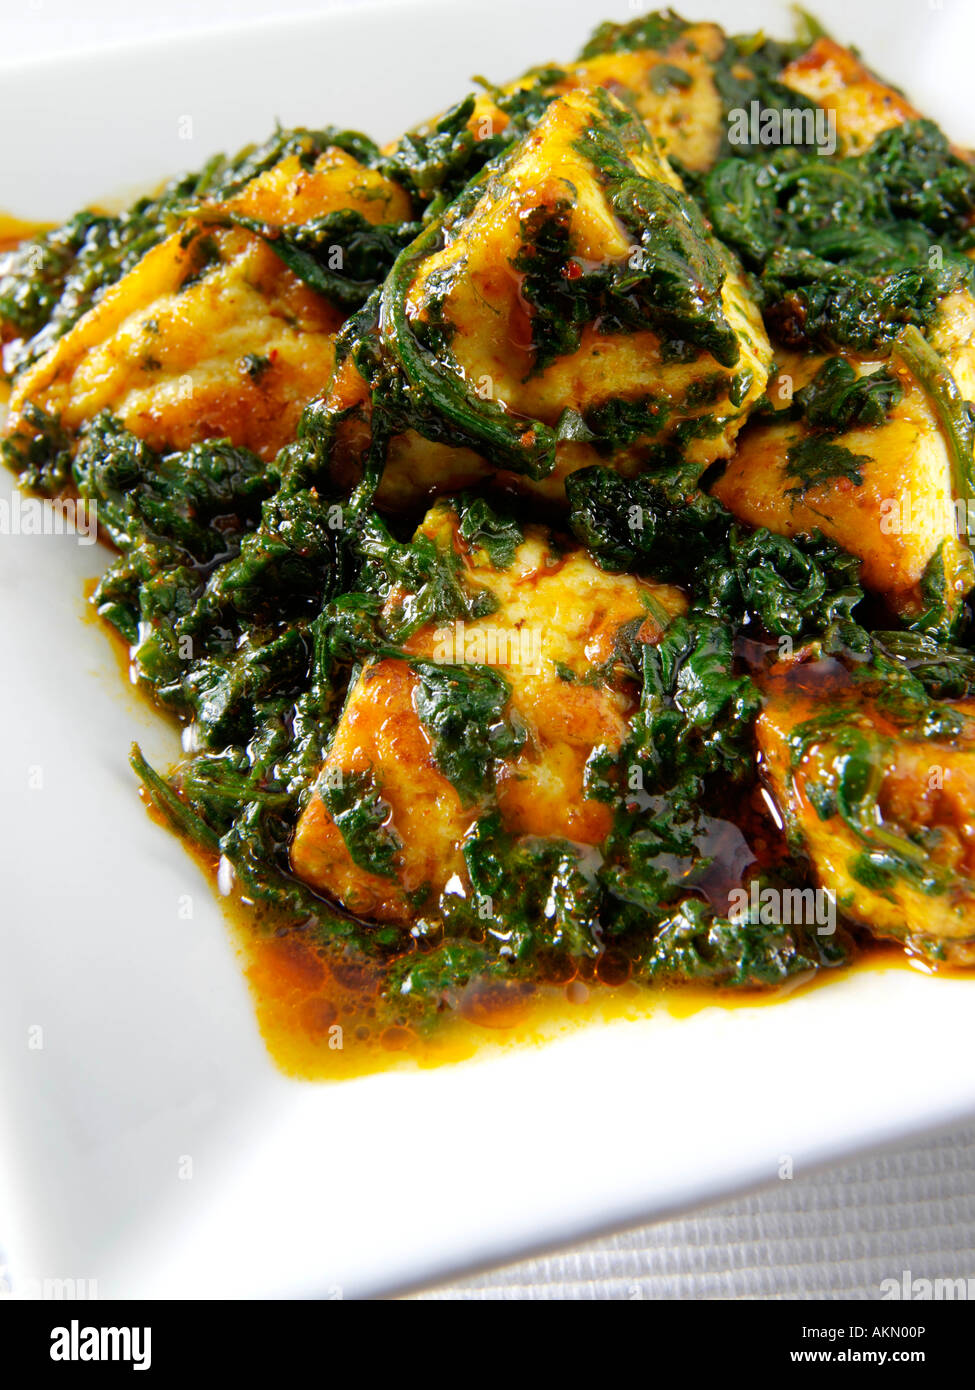 A dish of spicy Indian palak paneer spinach editorial food Stock Photo